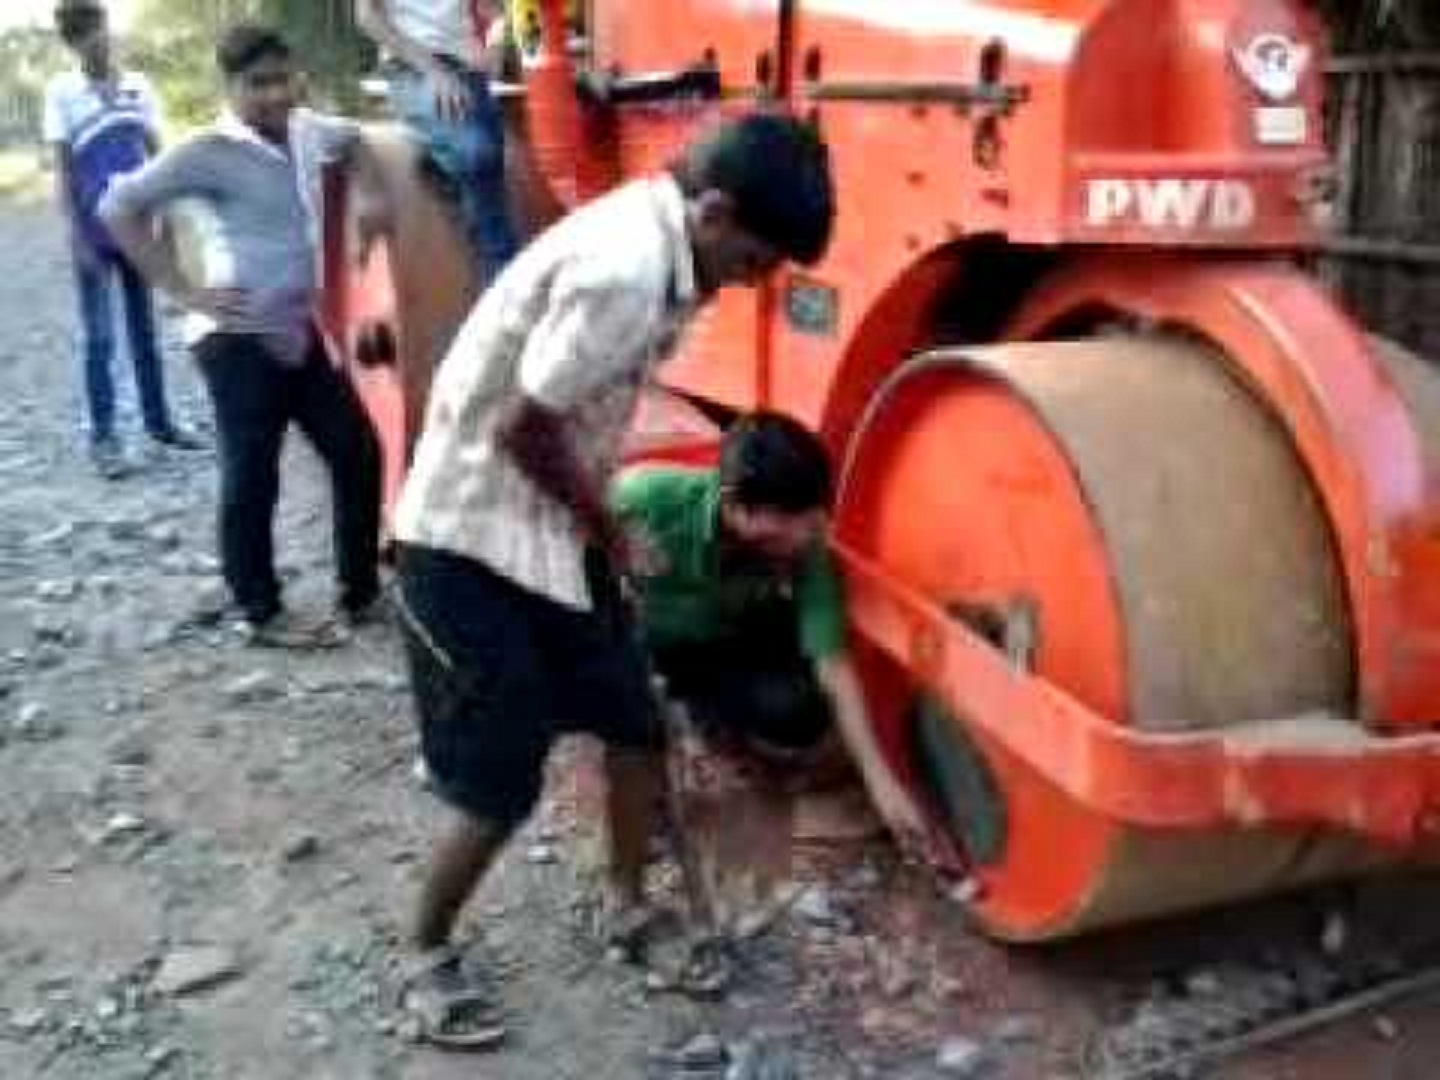 The child shattered with the road-roller totally grind